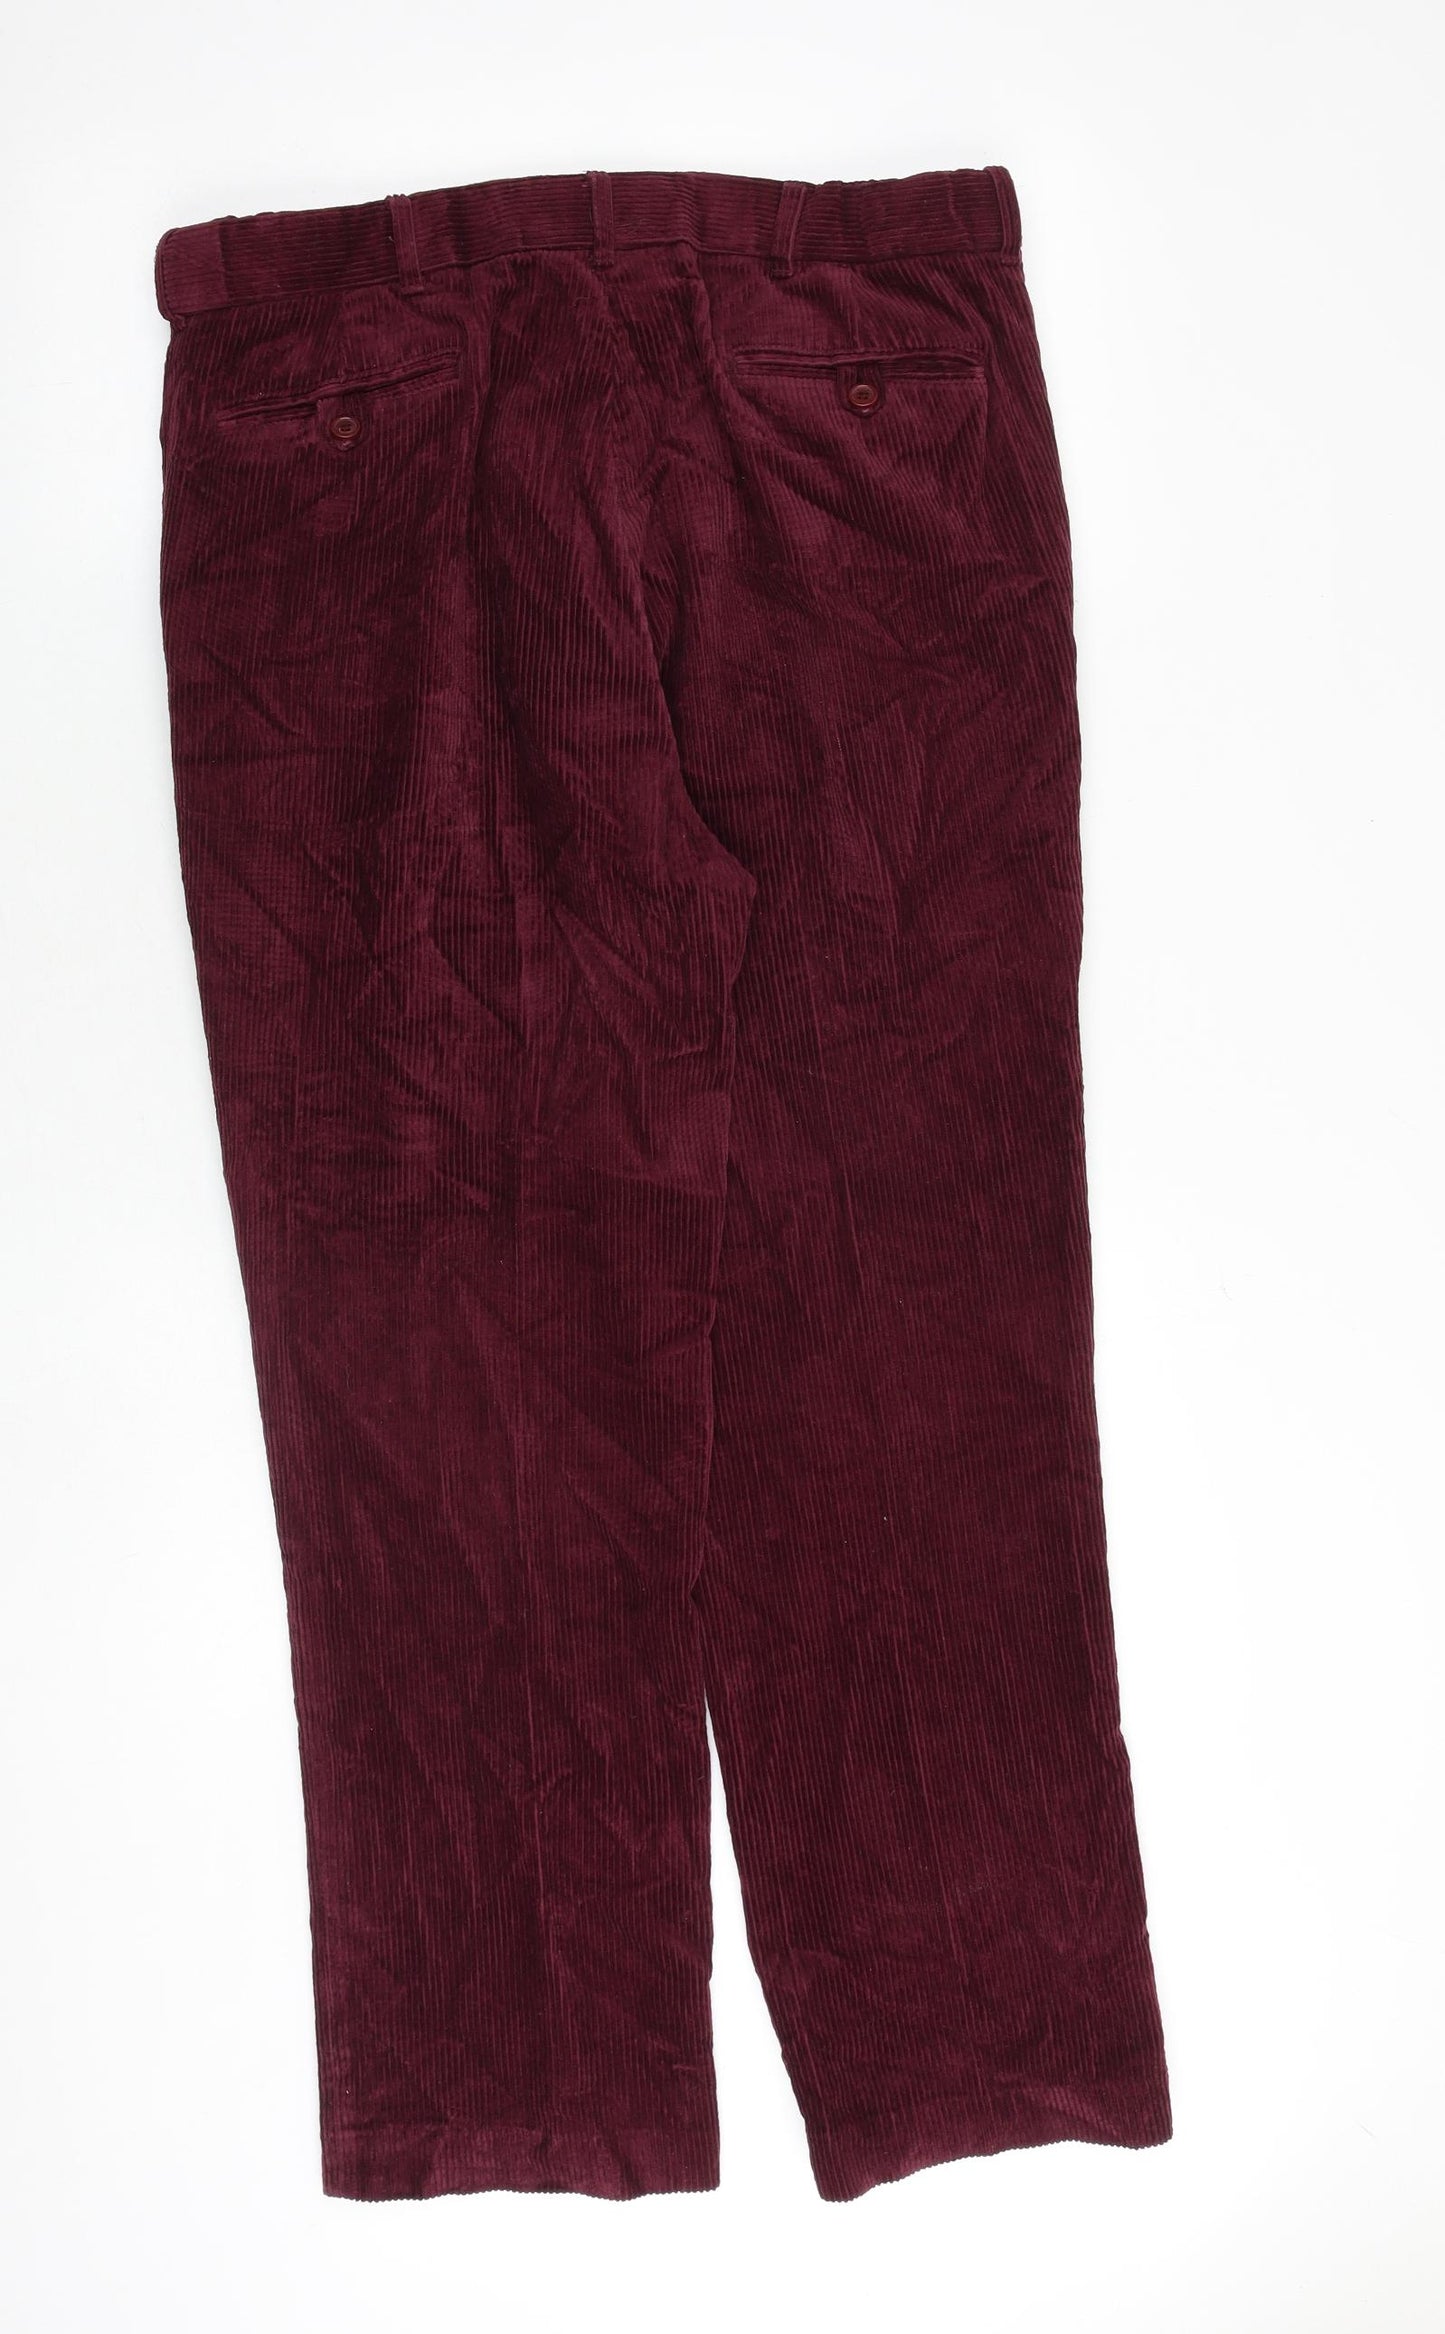 Peter Christian Mens Red Cotton Trousers Size 38 in Regular Zip